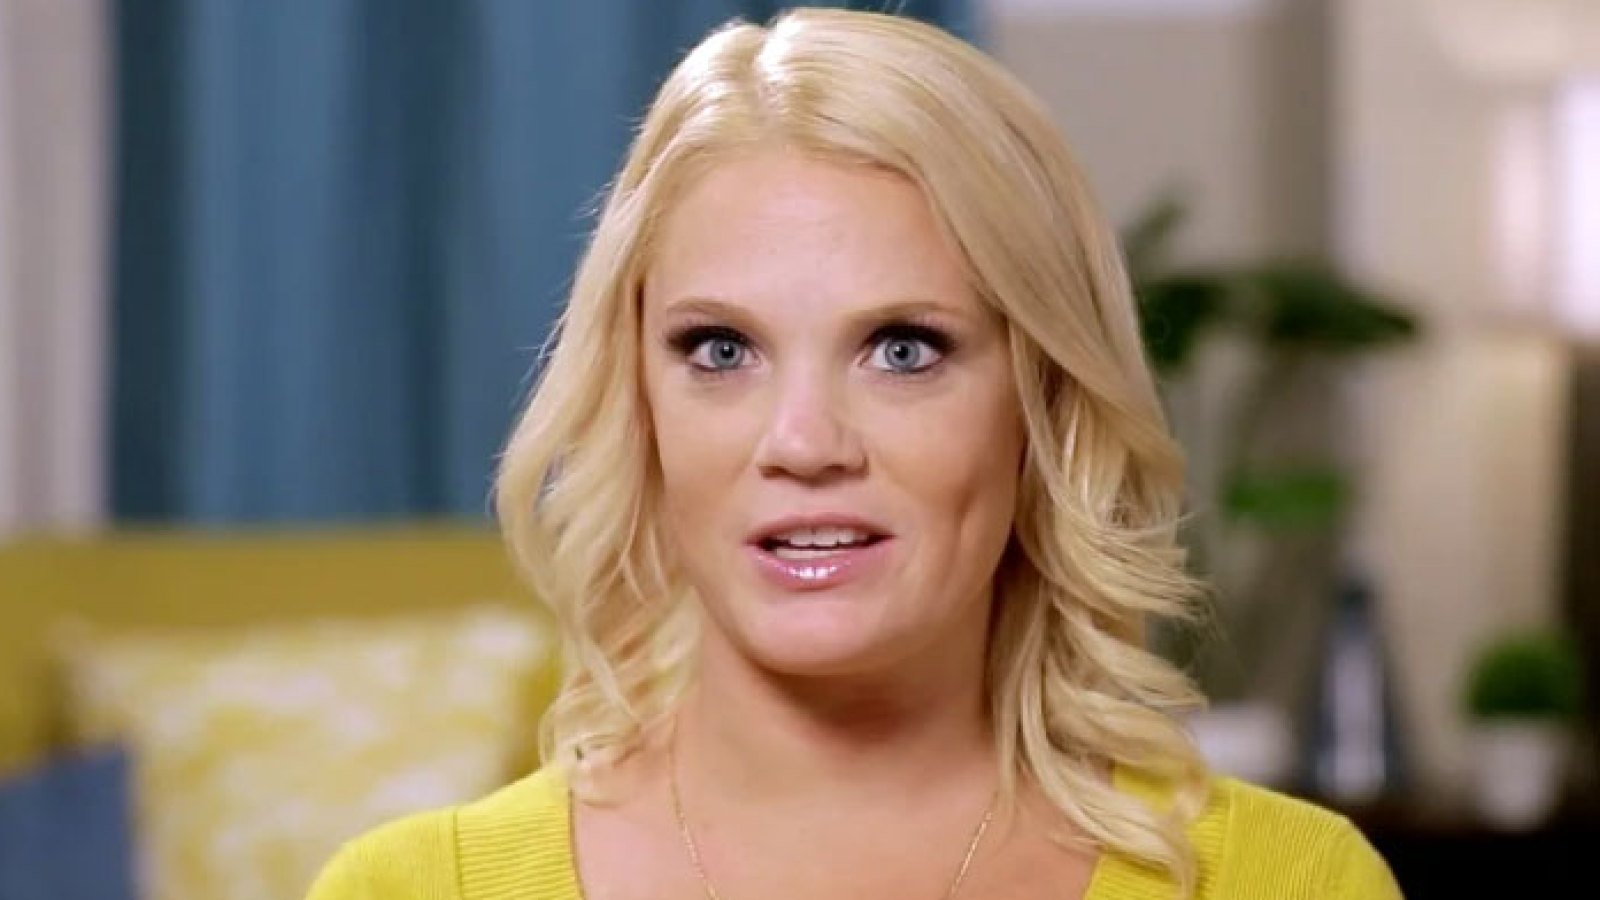 90 Day Fiance's Ashley Martson Is Ready to Date Again, Says New Man Will Need a Background Check